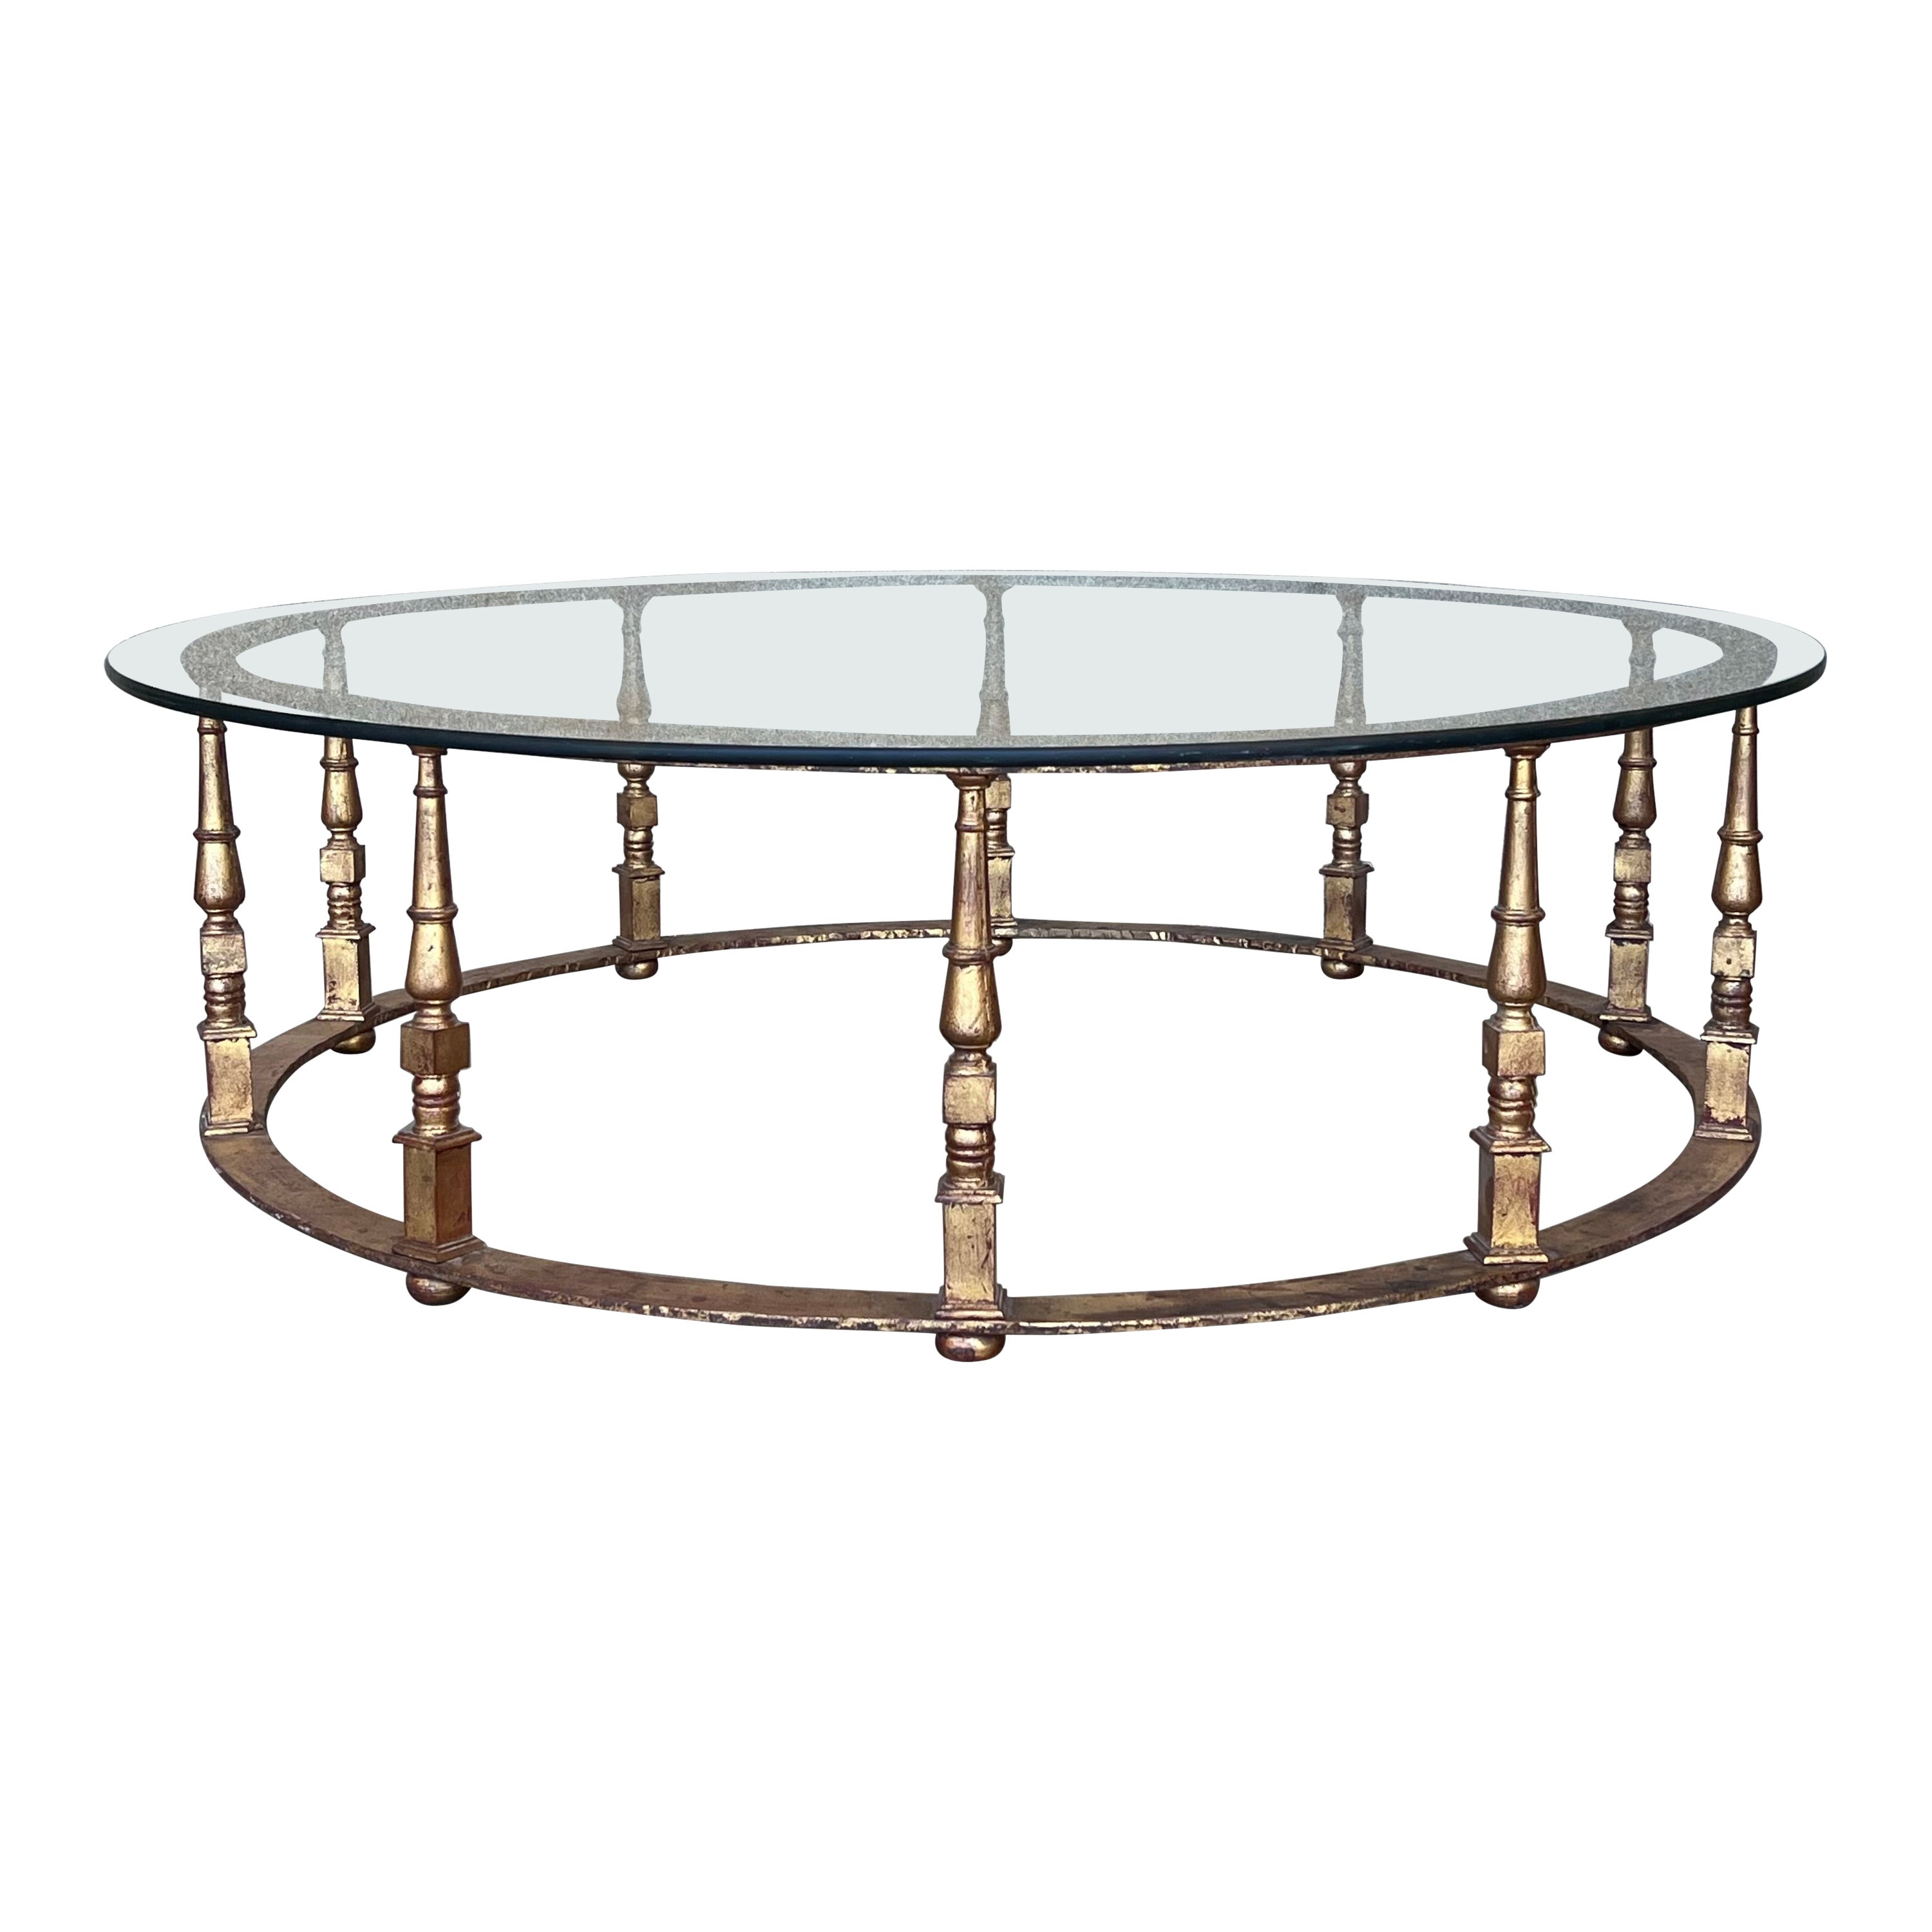 Maison Ramsay Style Round Iron Coffee Table Gold Leaf Finishing with Glass Top